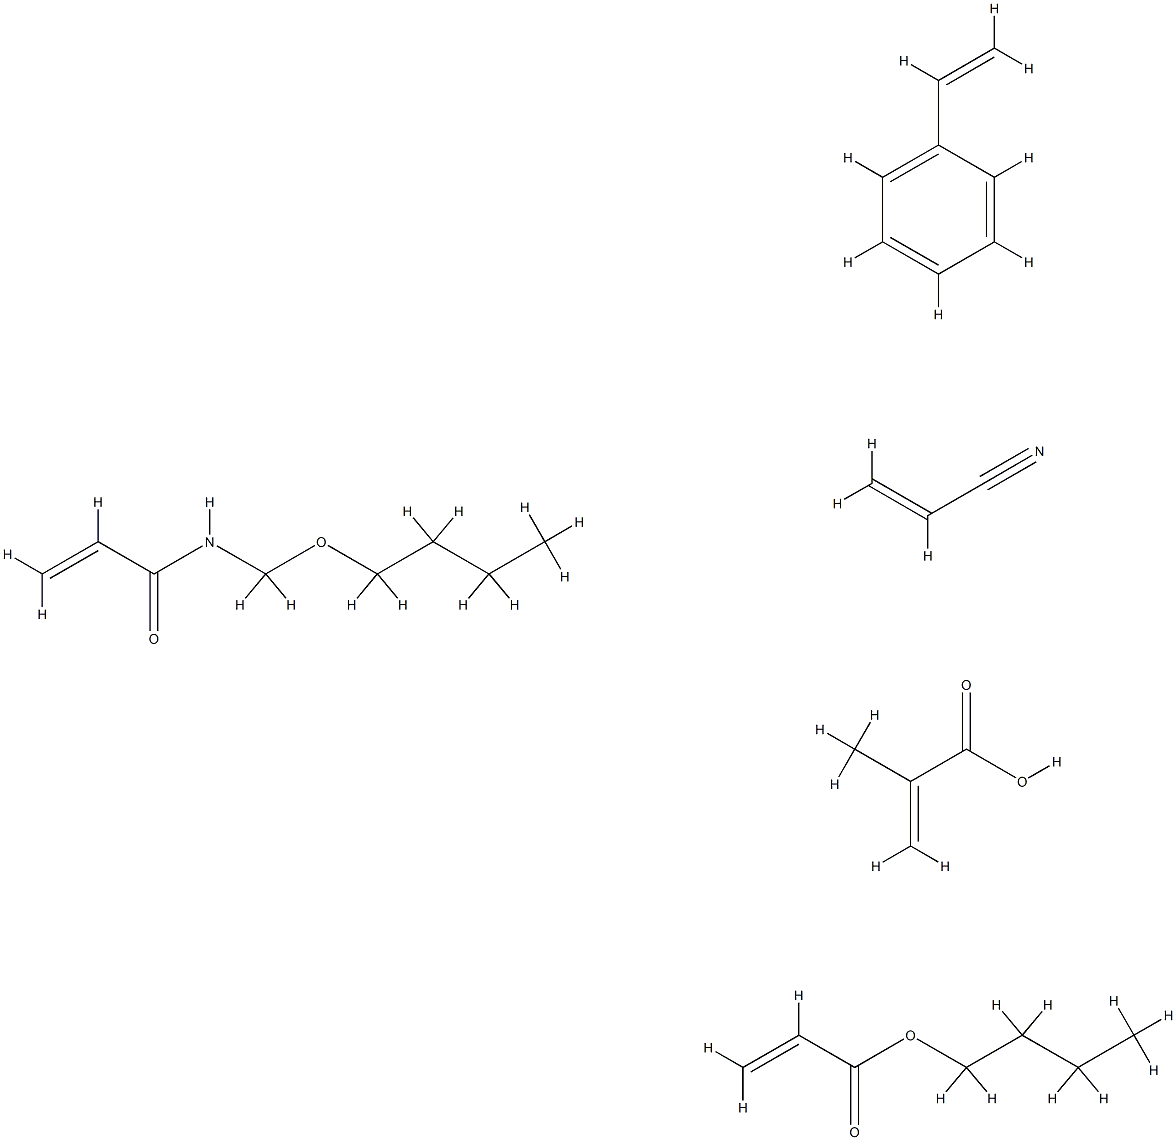 2-Propenoic acid, 2-methyl-, polymer with N-(butoxymethyl)-2-propenamide, butyl 2-propenoate, ethenylbenzene and 2-propenenitrile Structure